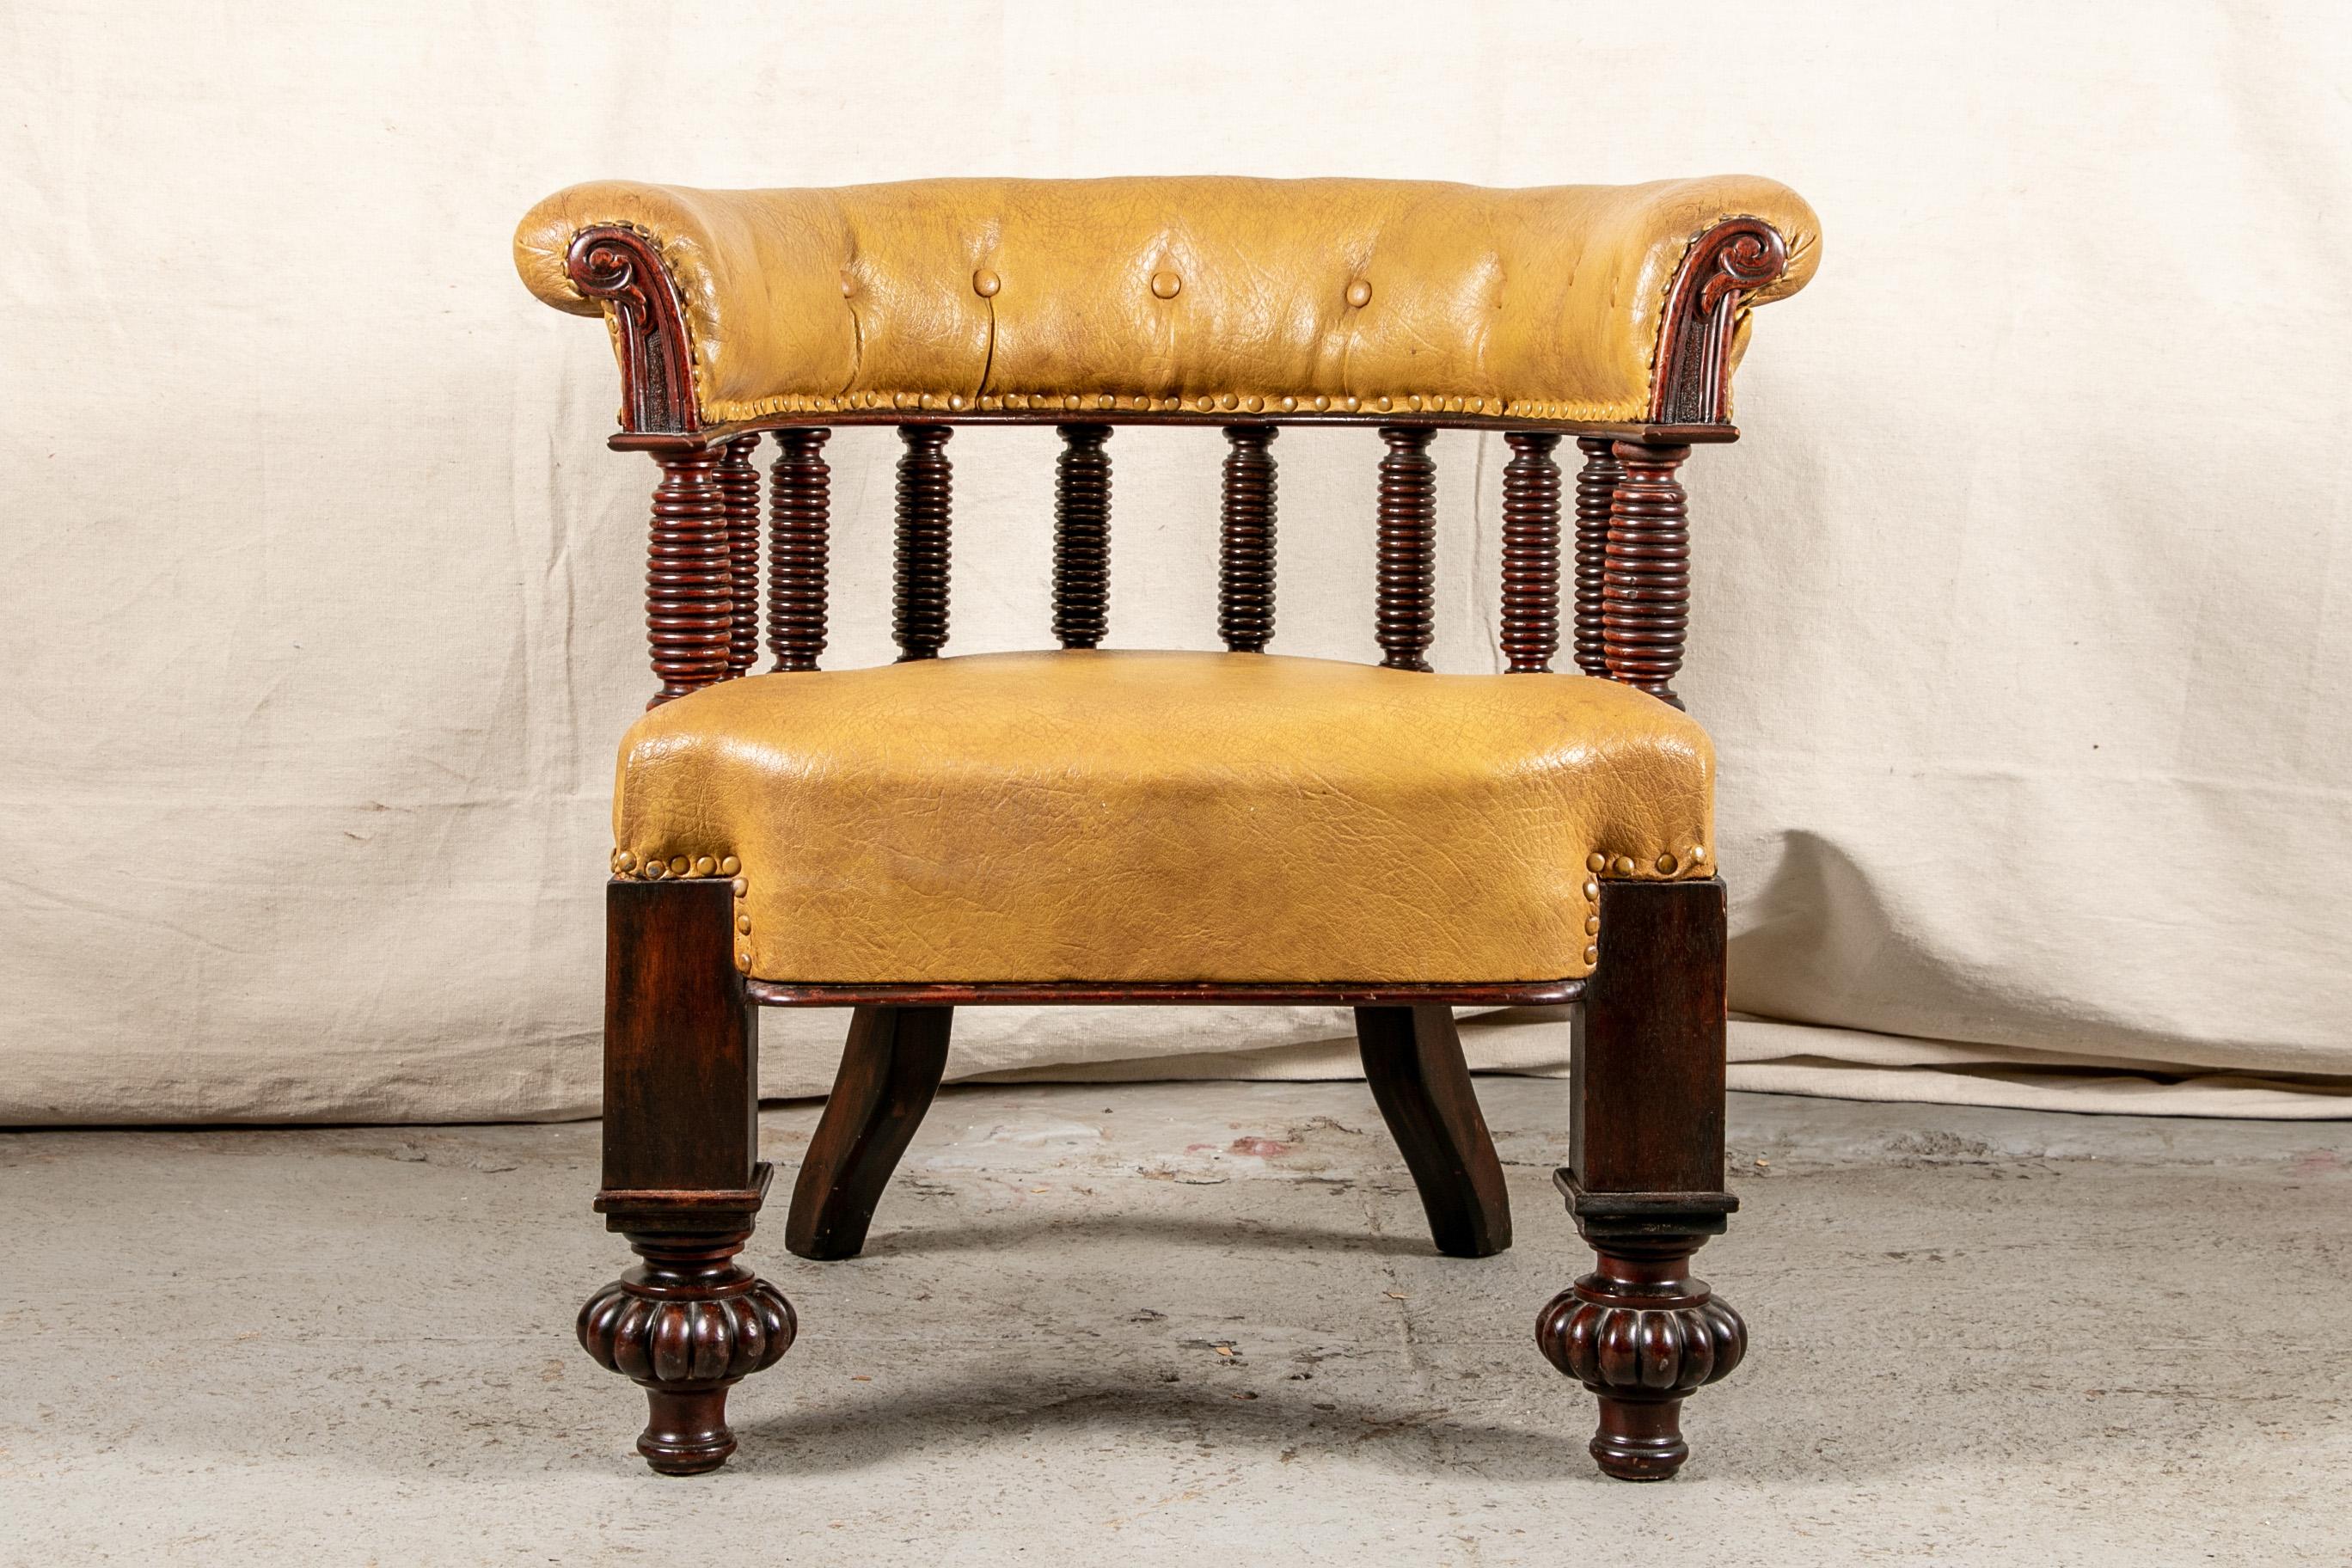 Antique aesthetic period leather library chair, tub shaped mahogany frame with multiple turned supports for the scrolled arms with tufted butterscotch tone leather upholstery with nail-head trim. The leather seat raised on block front legs with